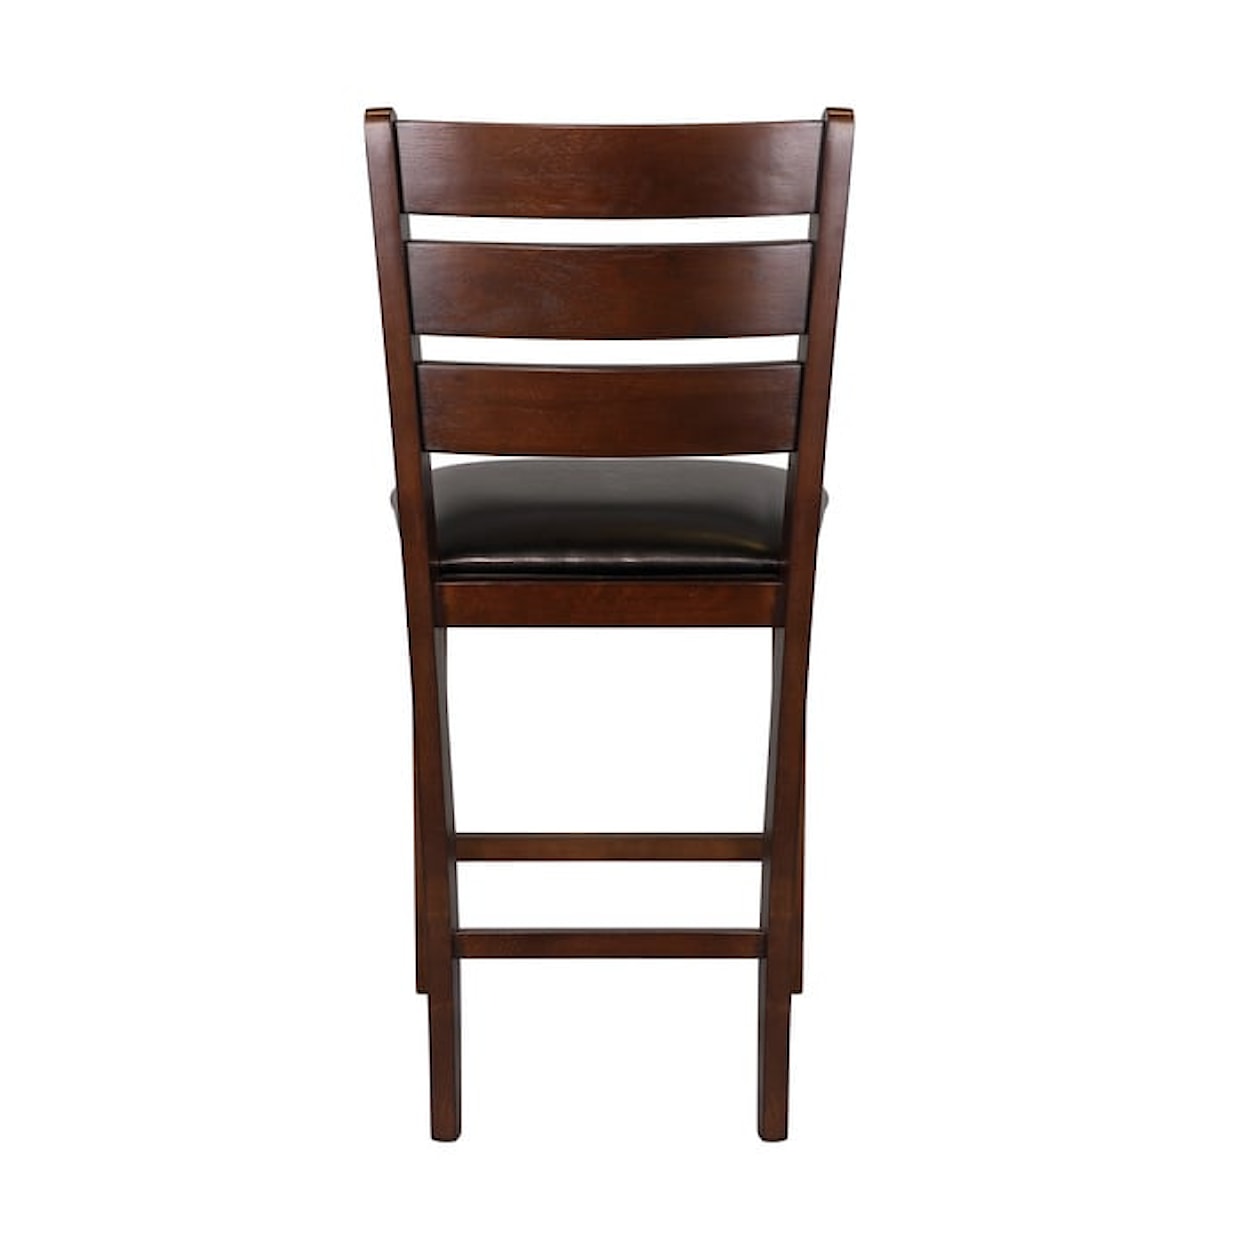 Homelegance Ameillia Counter Height Chair